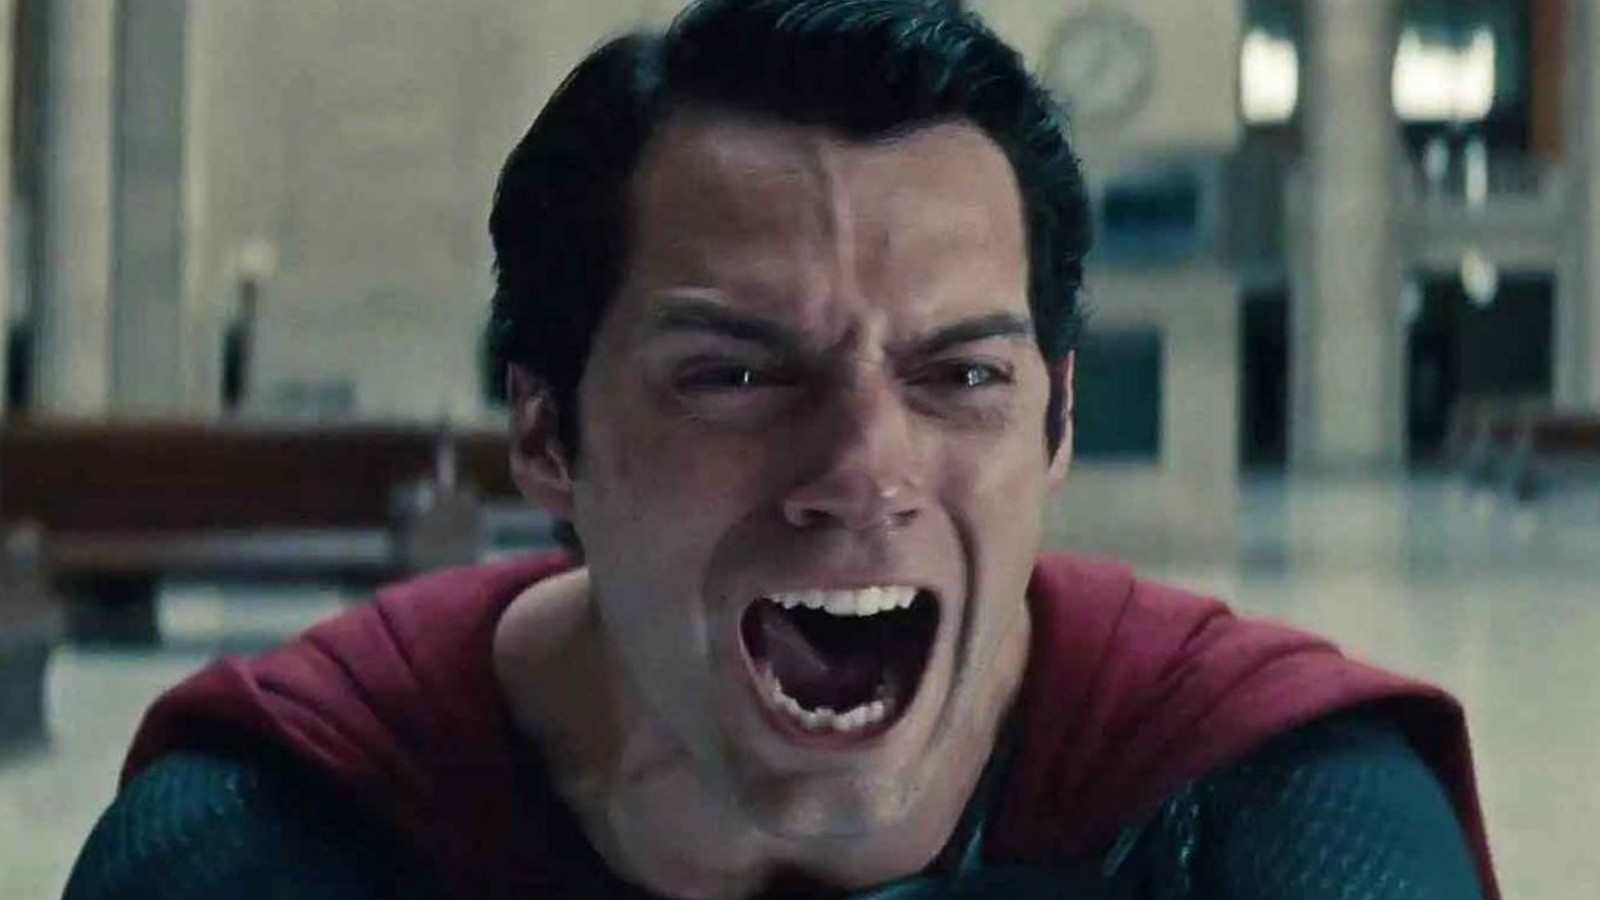 Henry Cavill's Superman in the aftermath of General Zod's murder